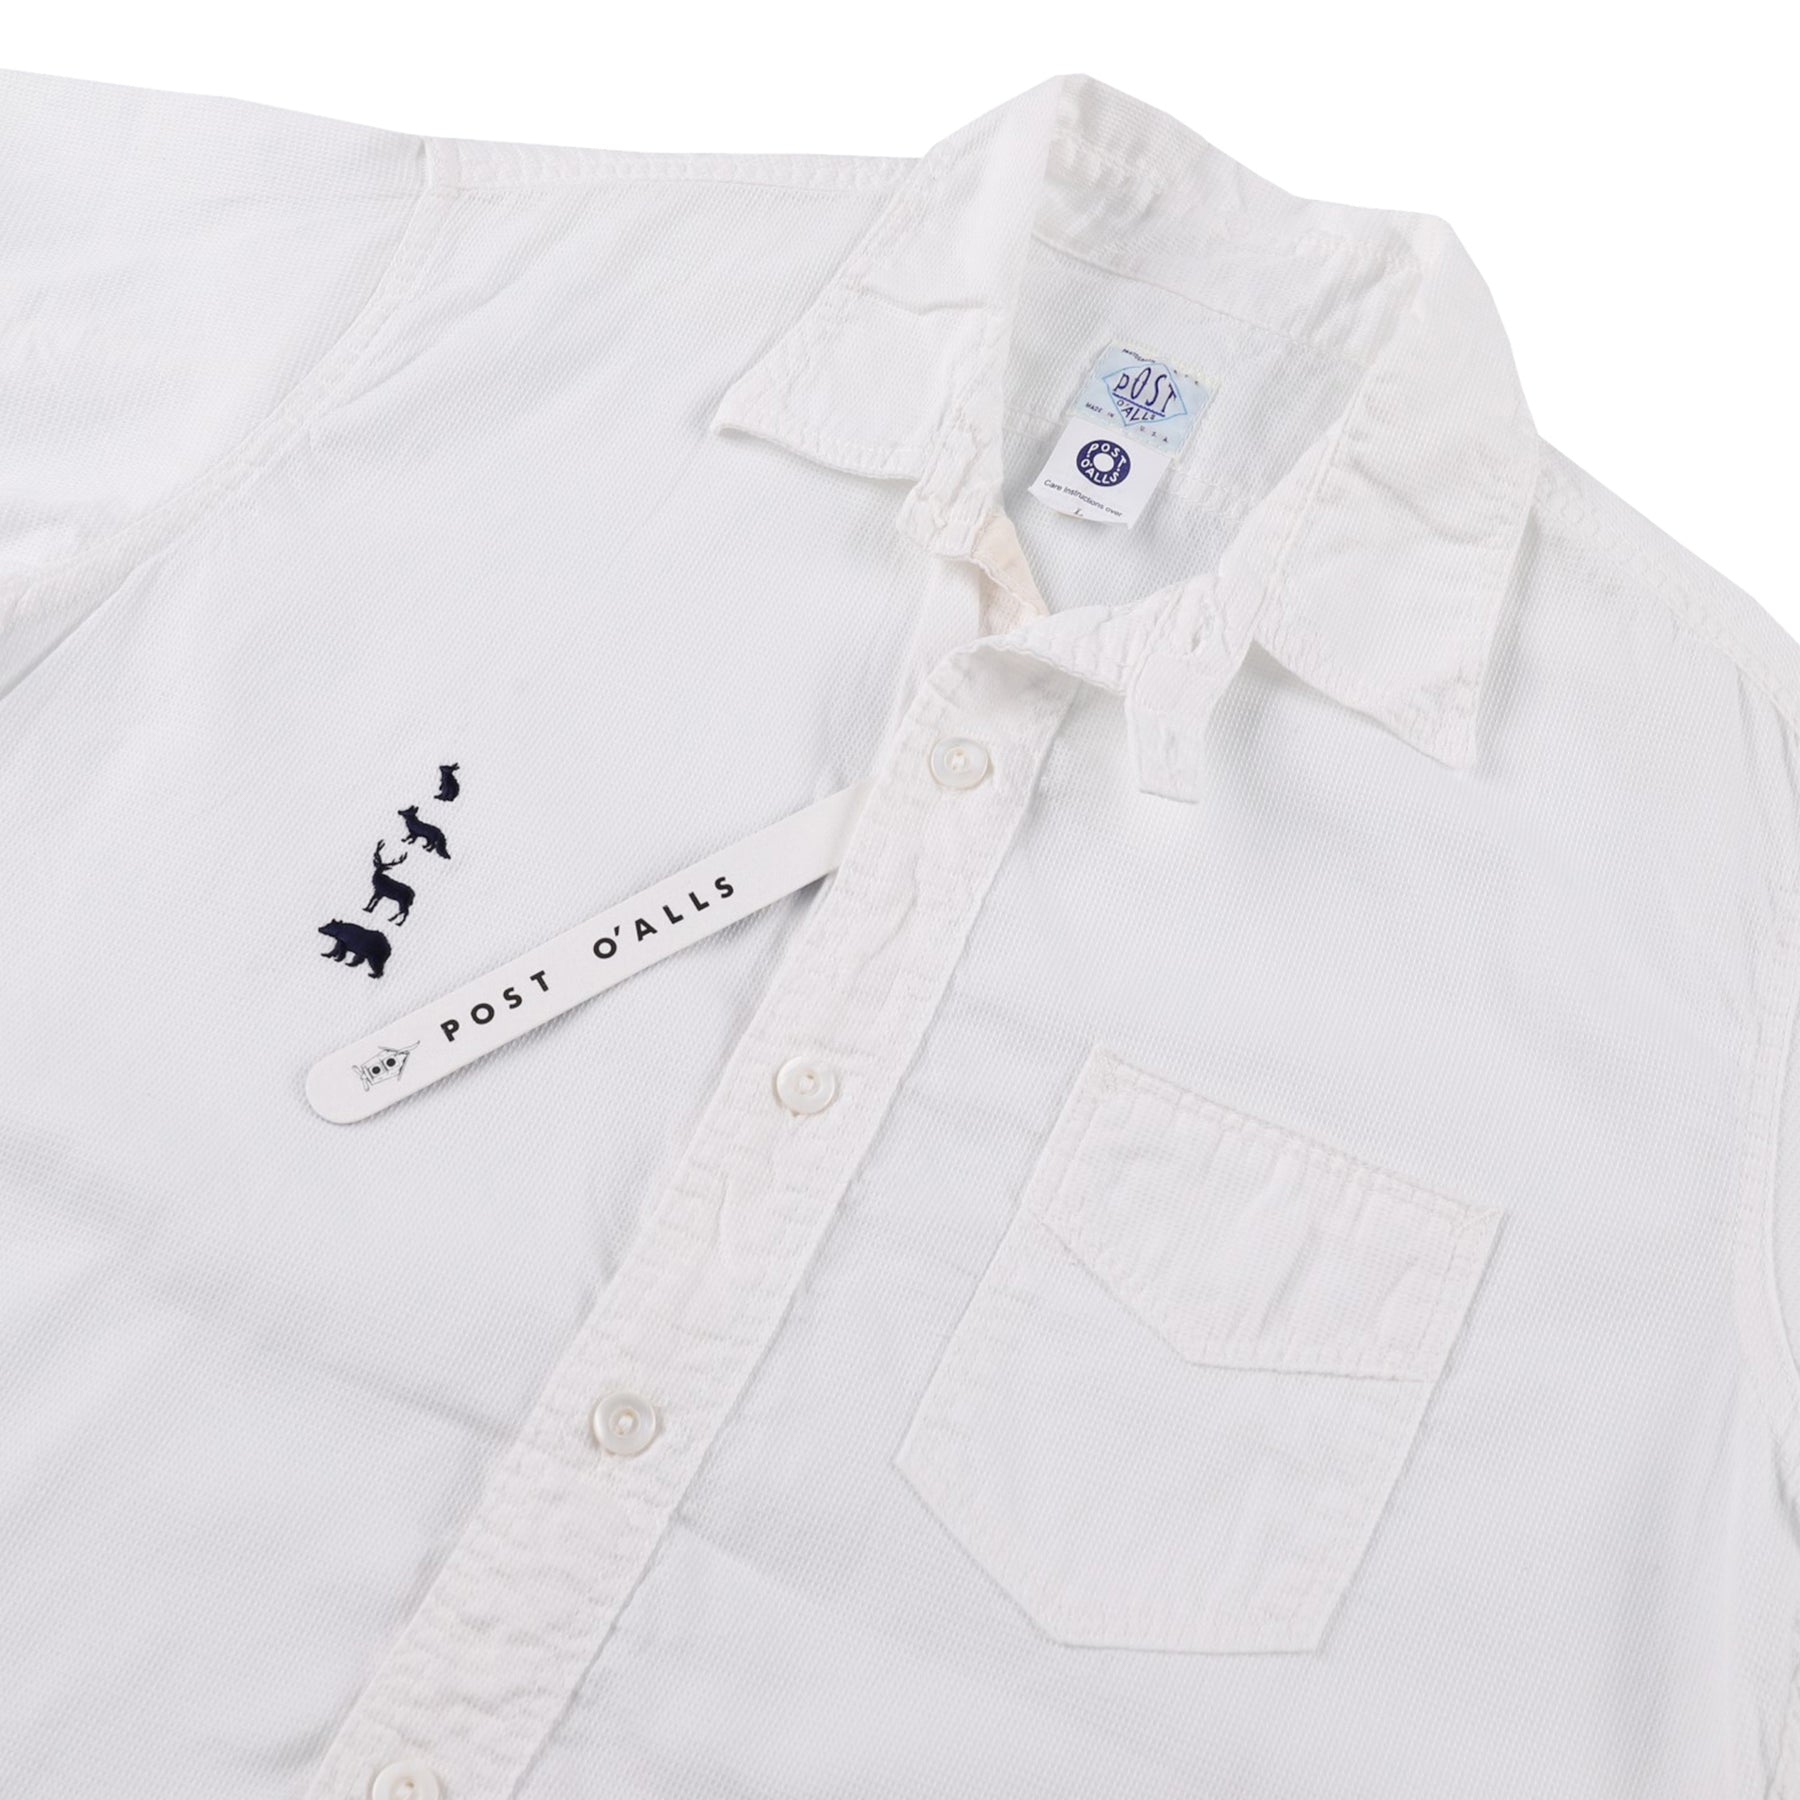 Post O'Alls x Mountain Research animal embroidery shirt : white 